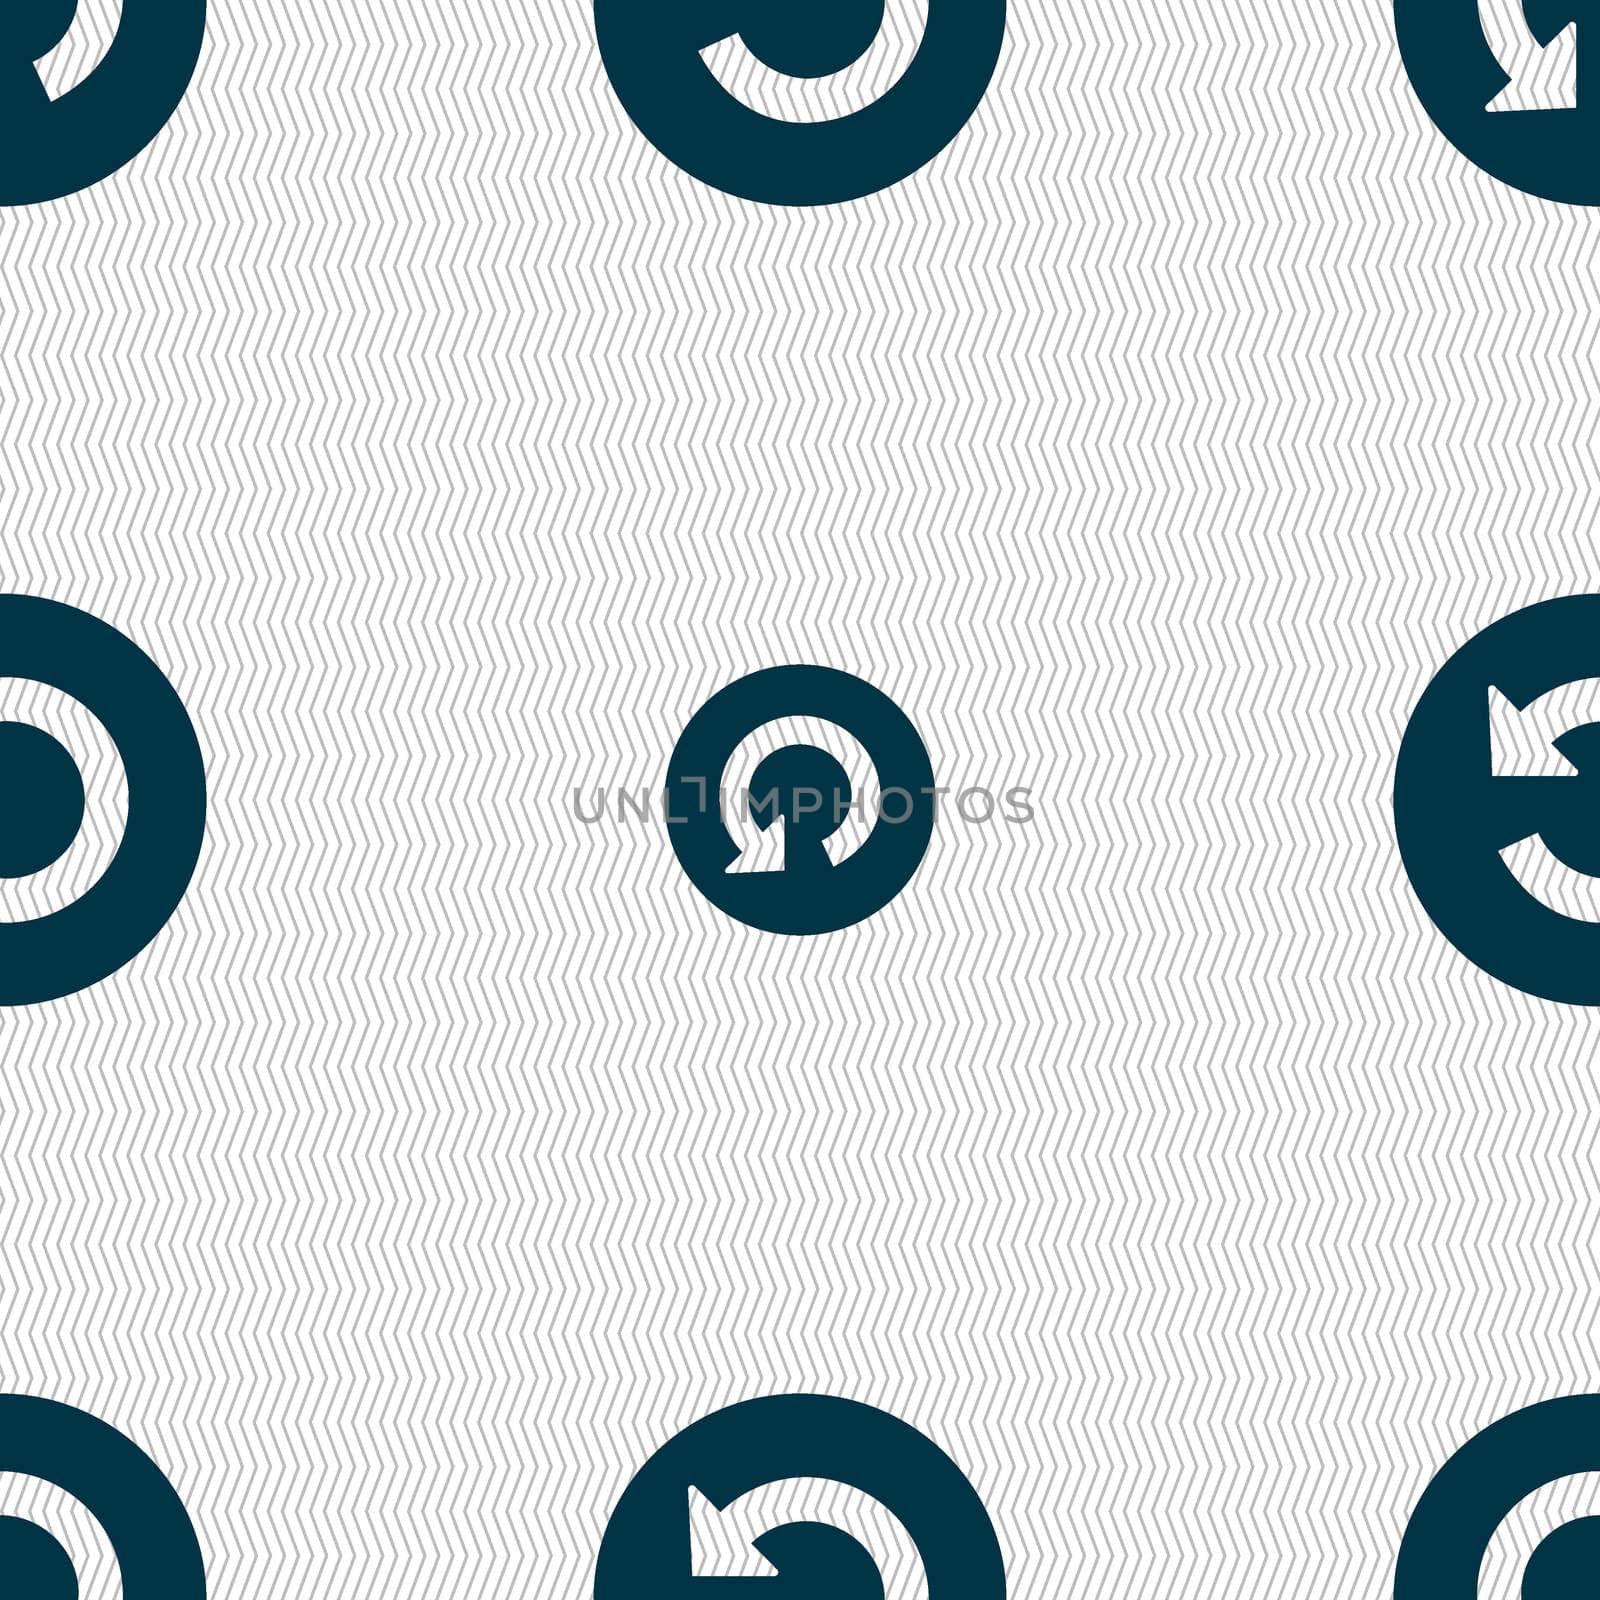 Upgrade, arrow icon sign. Seamless abstract background with geometric shapes.  by serhii_lohvyniuk